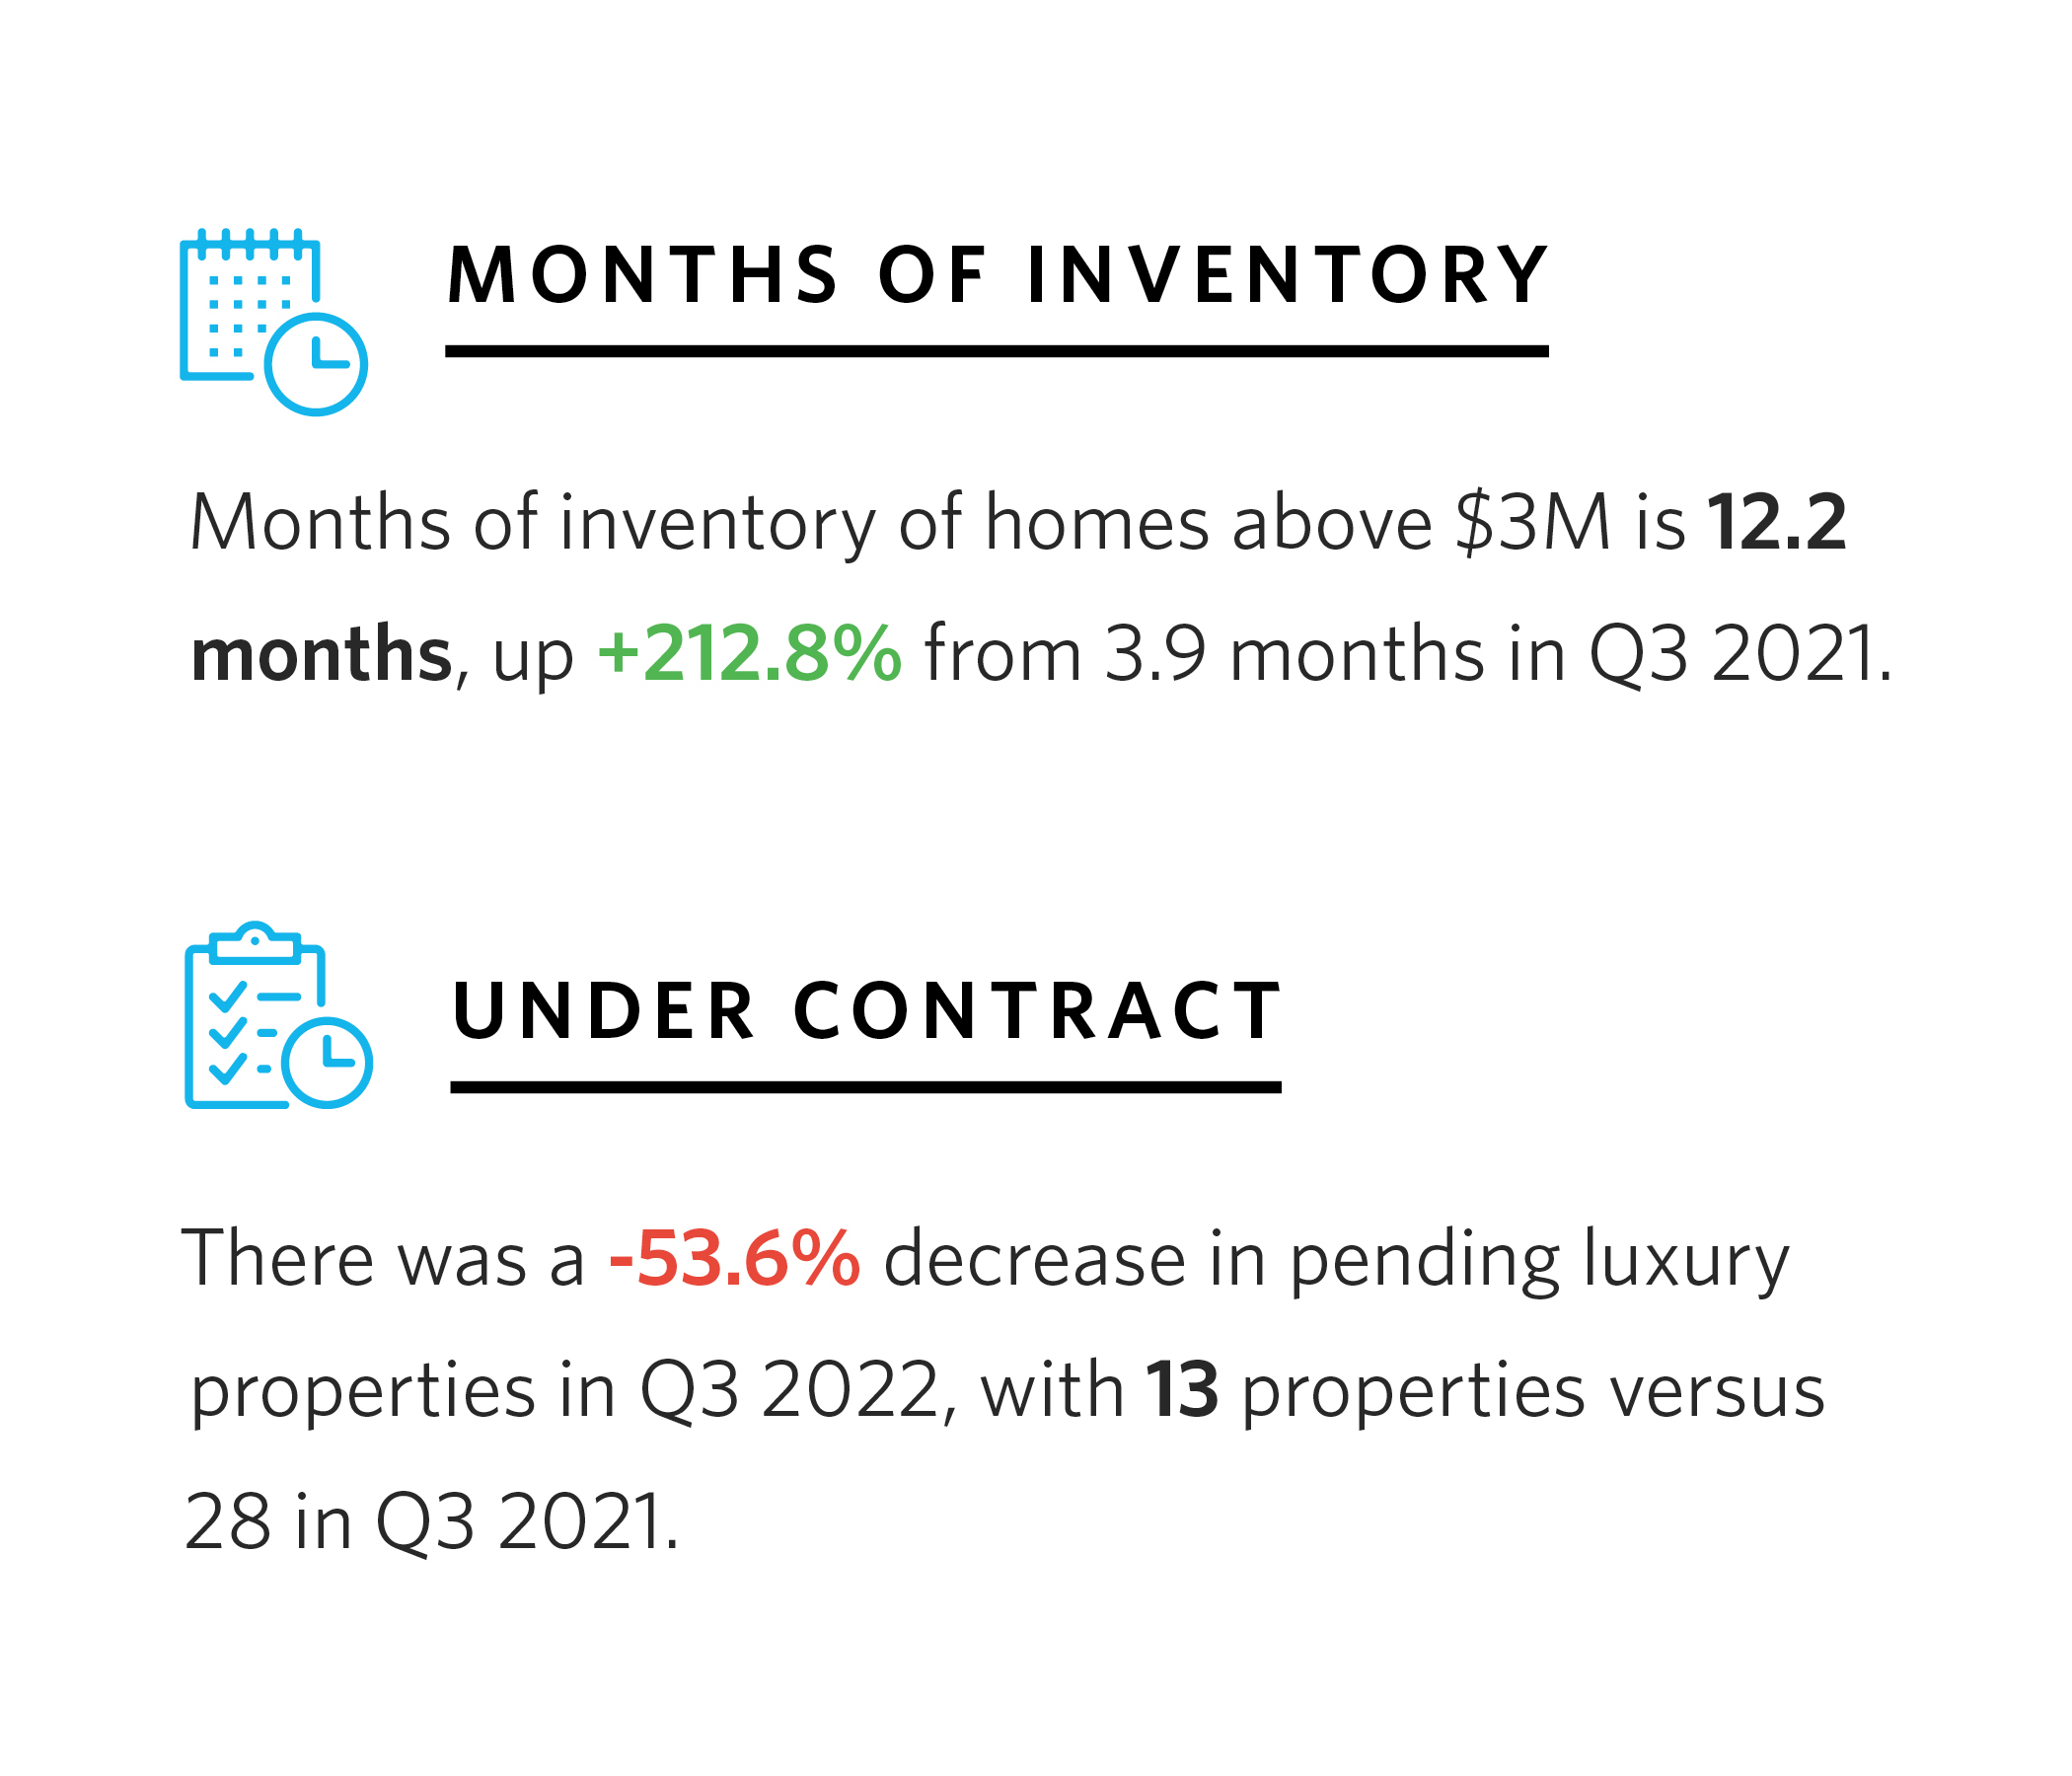 months of inventory of homes is up, and fewer luxury properties under contract 